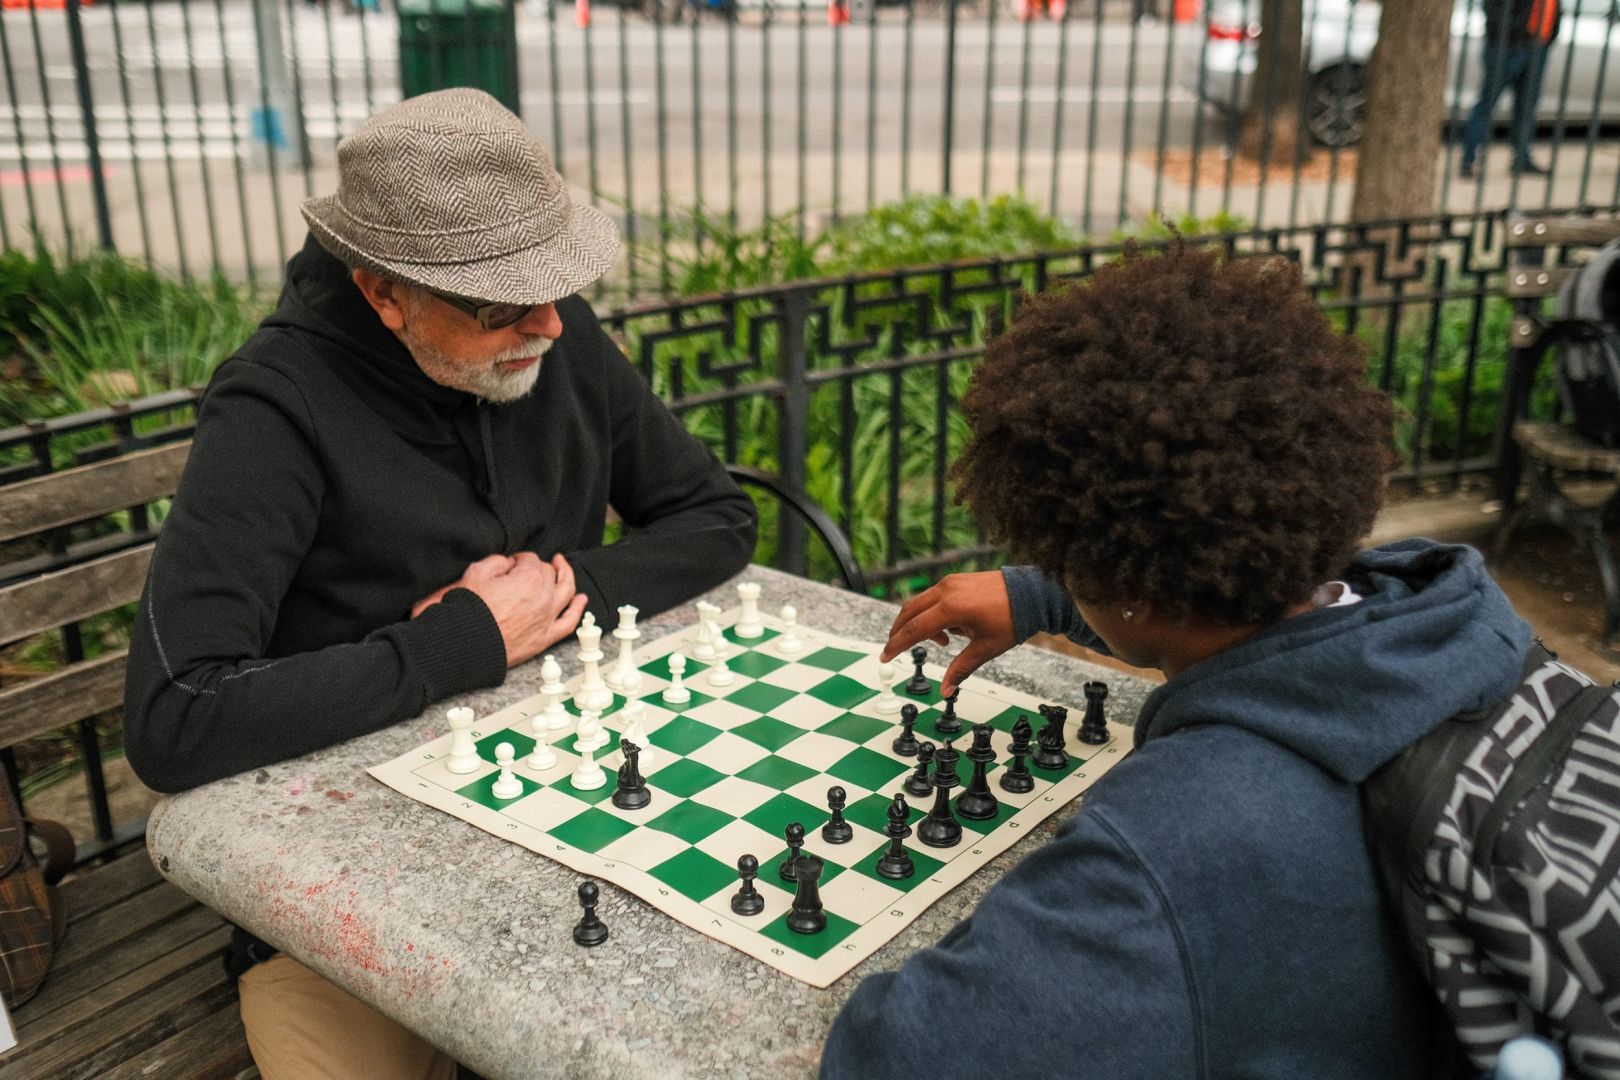 A Man And Woman Playing A Board Game